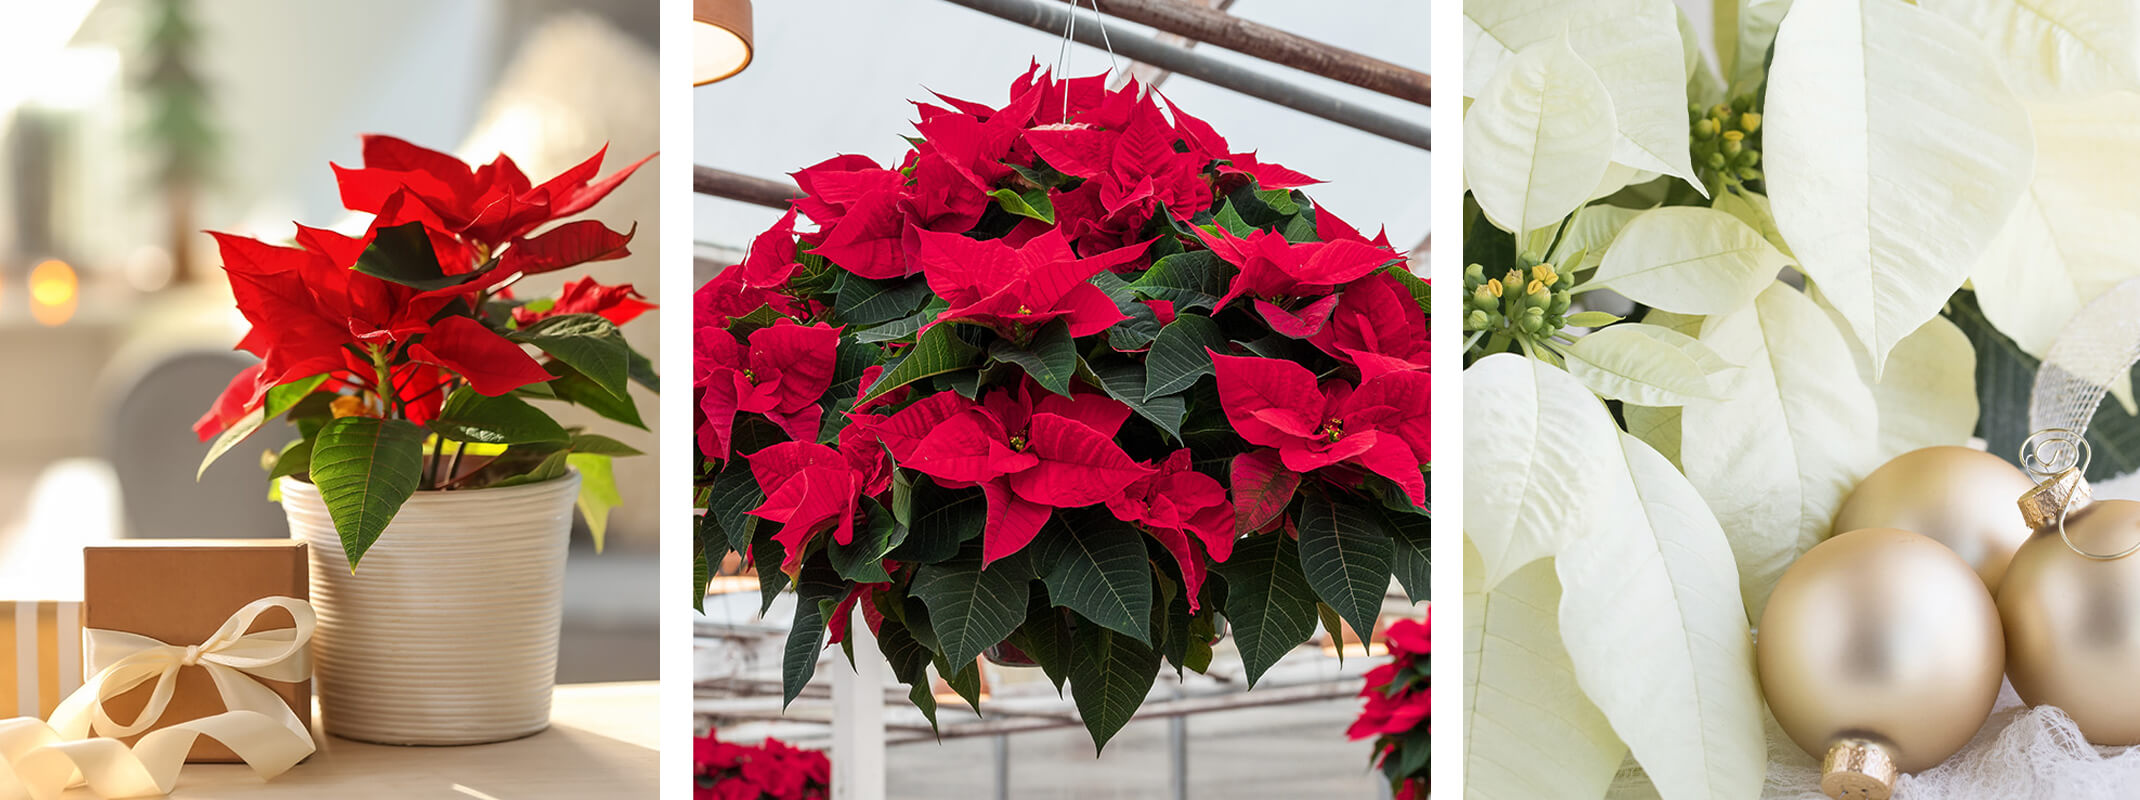 decorating with poinsettias, red poinsettia on table, one in hanging basket and an up close of a white one